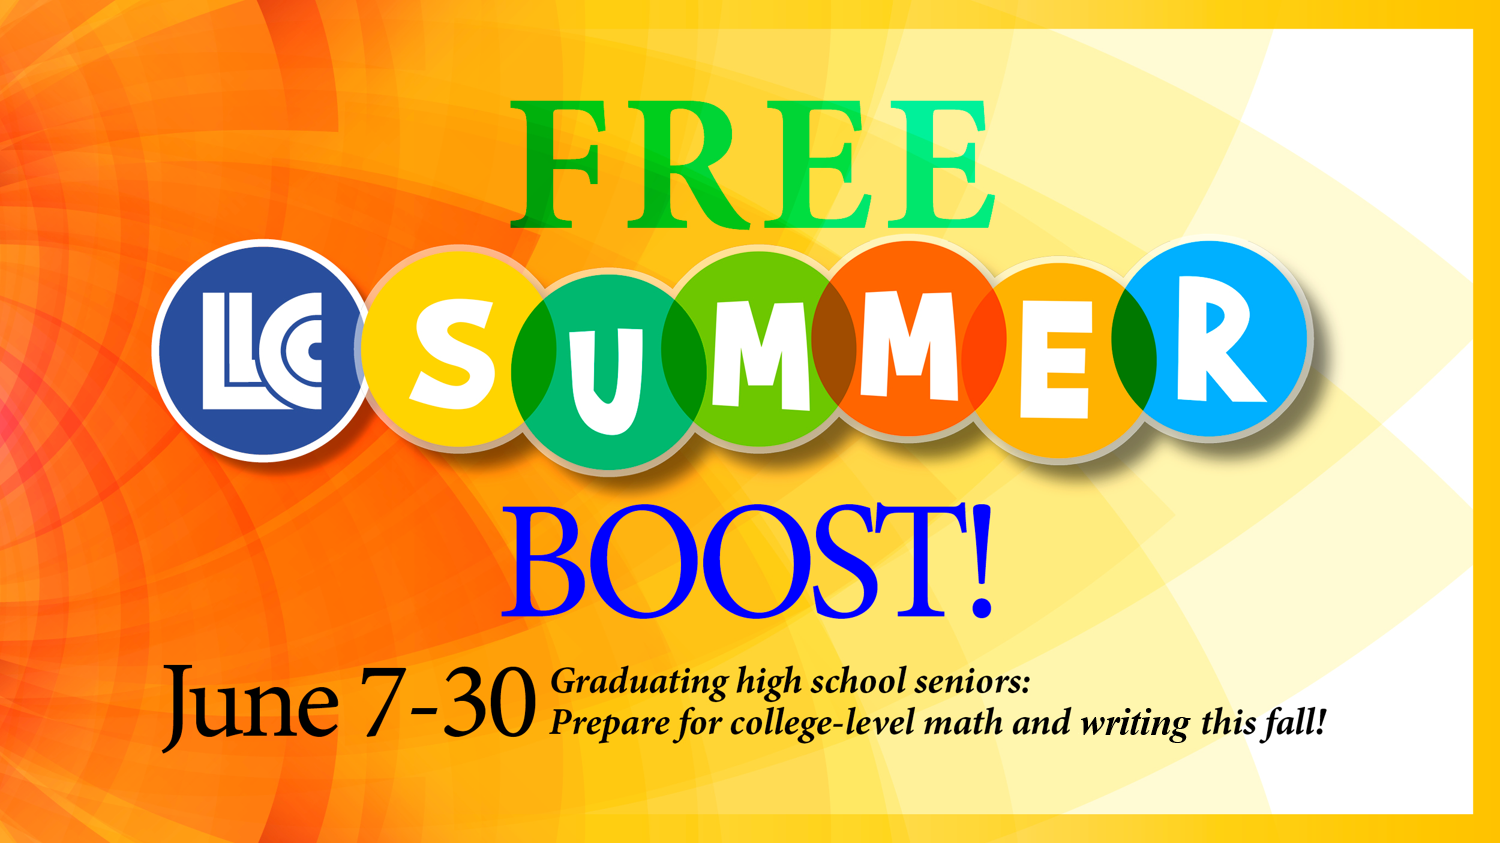 FREE LLCC Summer Boost! June 7-30. Graduating high school seniors: Prepare for college-level math and writing this fall!